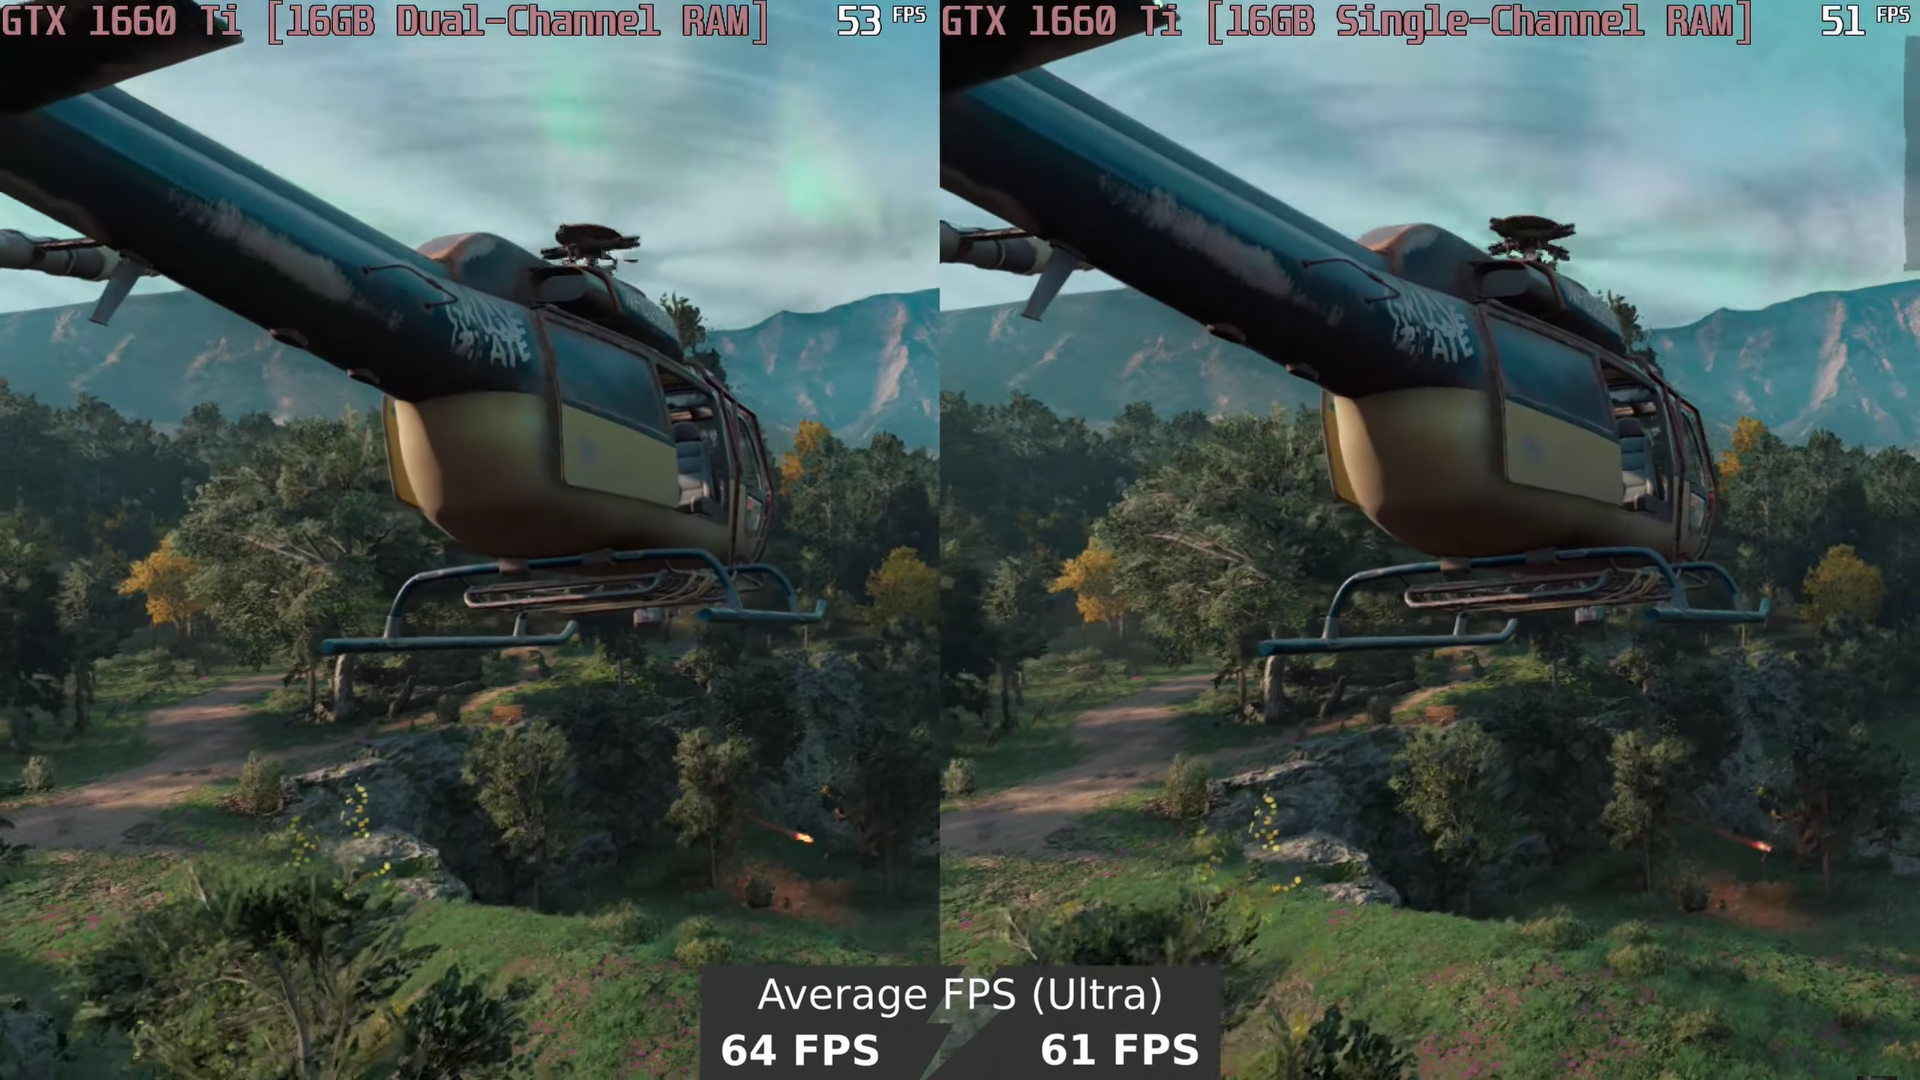 nakke tælle Hurtigt Gaming on Dual-Channel vs Single Channel RAM – what is the FPS difference?  | LaptopMedia.com